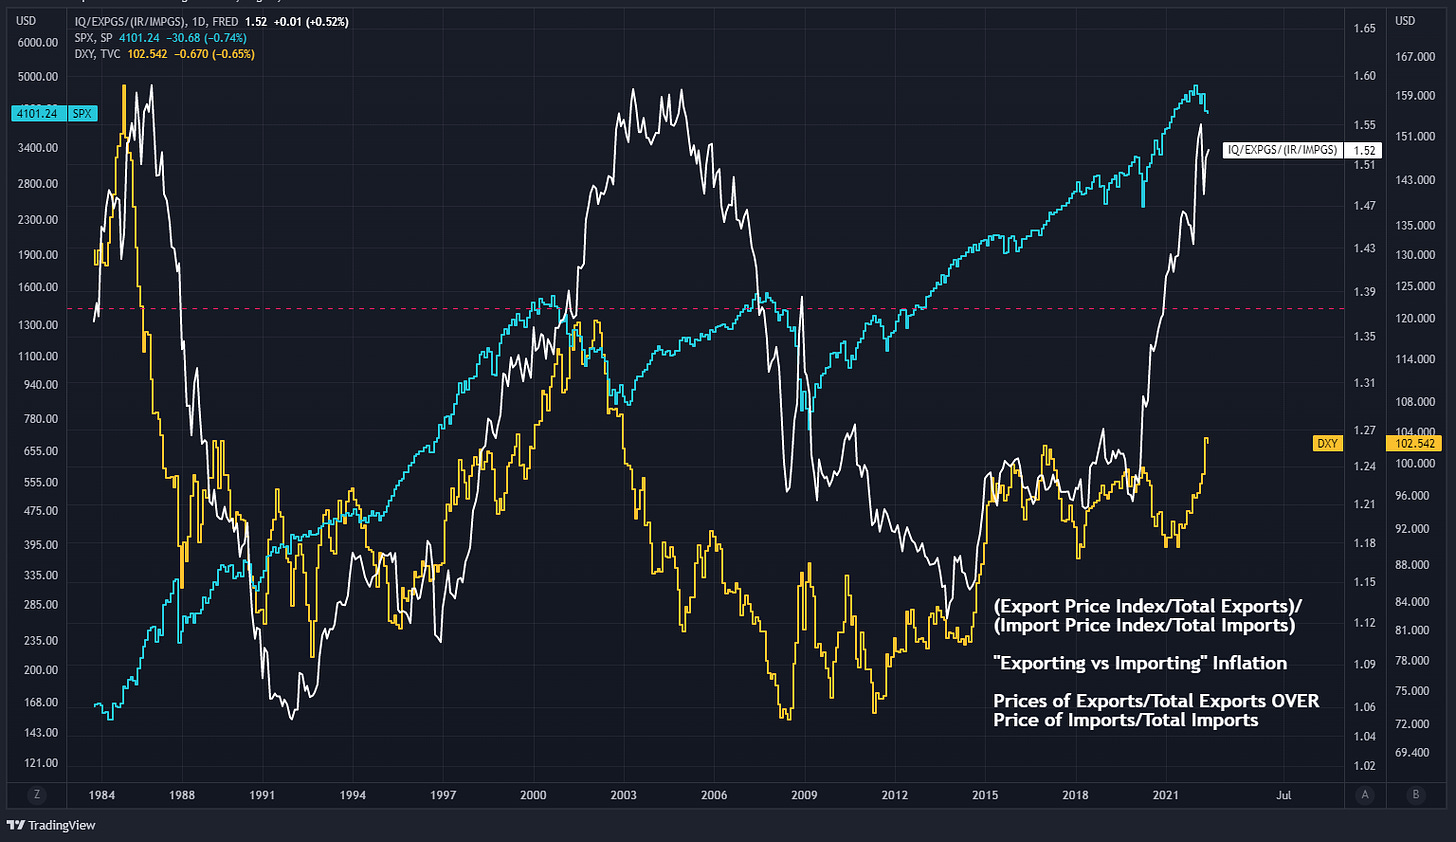 IQ/EXPGS/(IR/IMPGS), ID, FRED 
1 · 5 ~ + 0.01 (+0.52 ) 
SPX, SP 4101.24 -3 68 卜 0.74 
DXY,TVC 10 ㄥ 54 ~ 一 0.670 ( 一 0.65 ) 
167. 
159. 1 
151. 
143. 
28 【 .C 
23 【 . 仩 〕 
135. 
19 【 .C 
130. 
125. 
16 【 .C 
120. 1 
13 J.C 
11 ( . 仩 〕 
114. 
L31 
108. 
1 I. 
L24 
92 』 丨 
L18 
3351 
(Export Price Index/Total Exports)/ 
(Import Price Index/Totallmports) 
I. 12 
81 』 丨 
235. 1 
"Exporting vs Importing" Inflation 
Prices ofExports/T0tal Exports OVER 
1681 
Price of Imports/T0tallmports 
1431 
121. ( 
1991 
1997 
2009 
201 ~ 
2015 
2018 
'YTradingView 